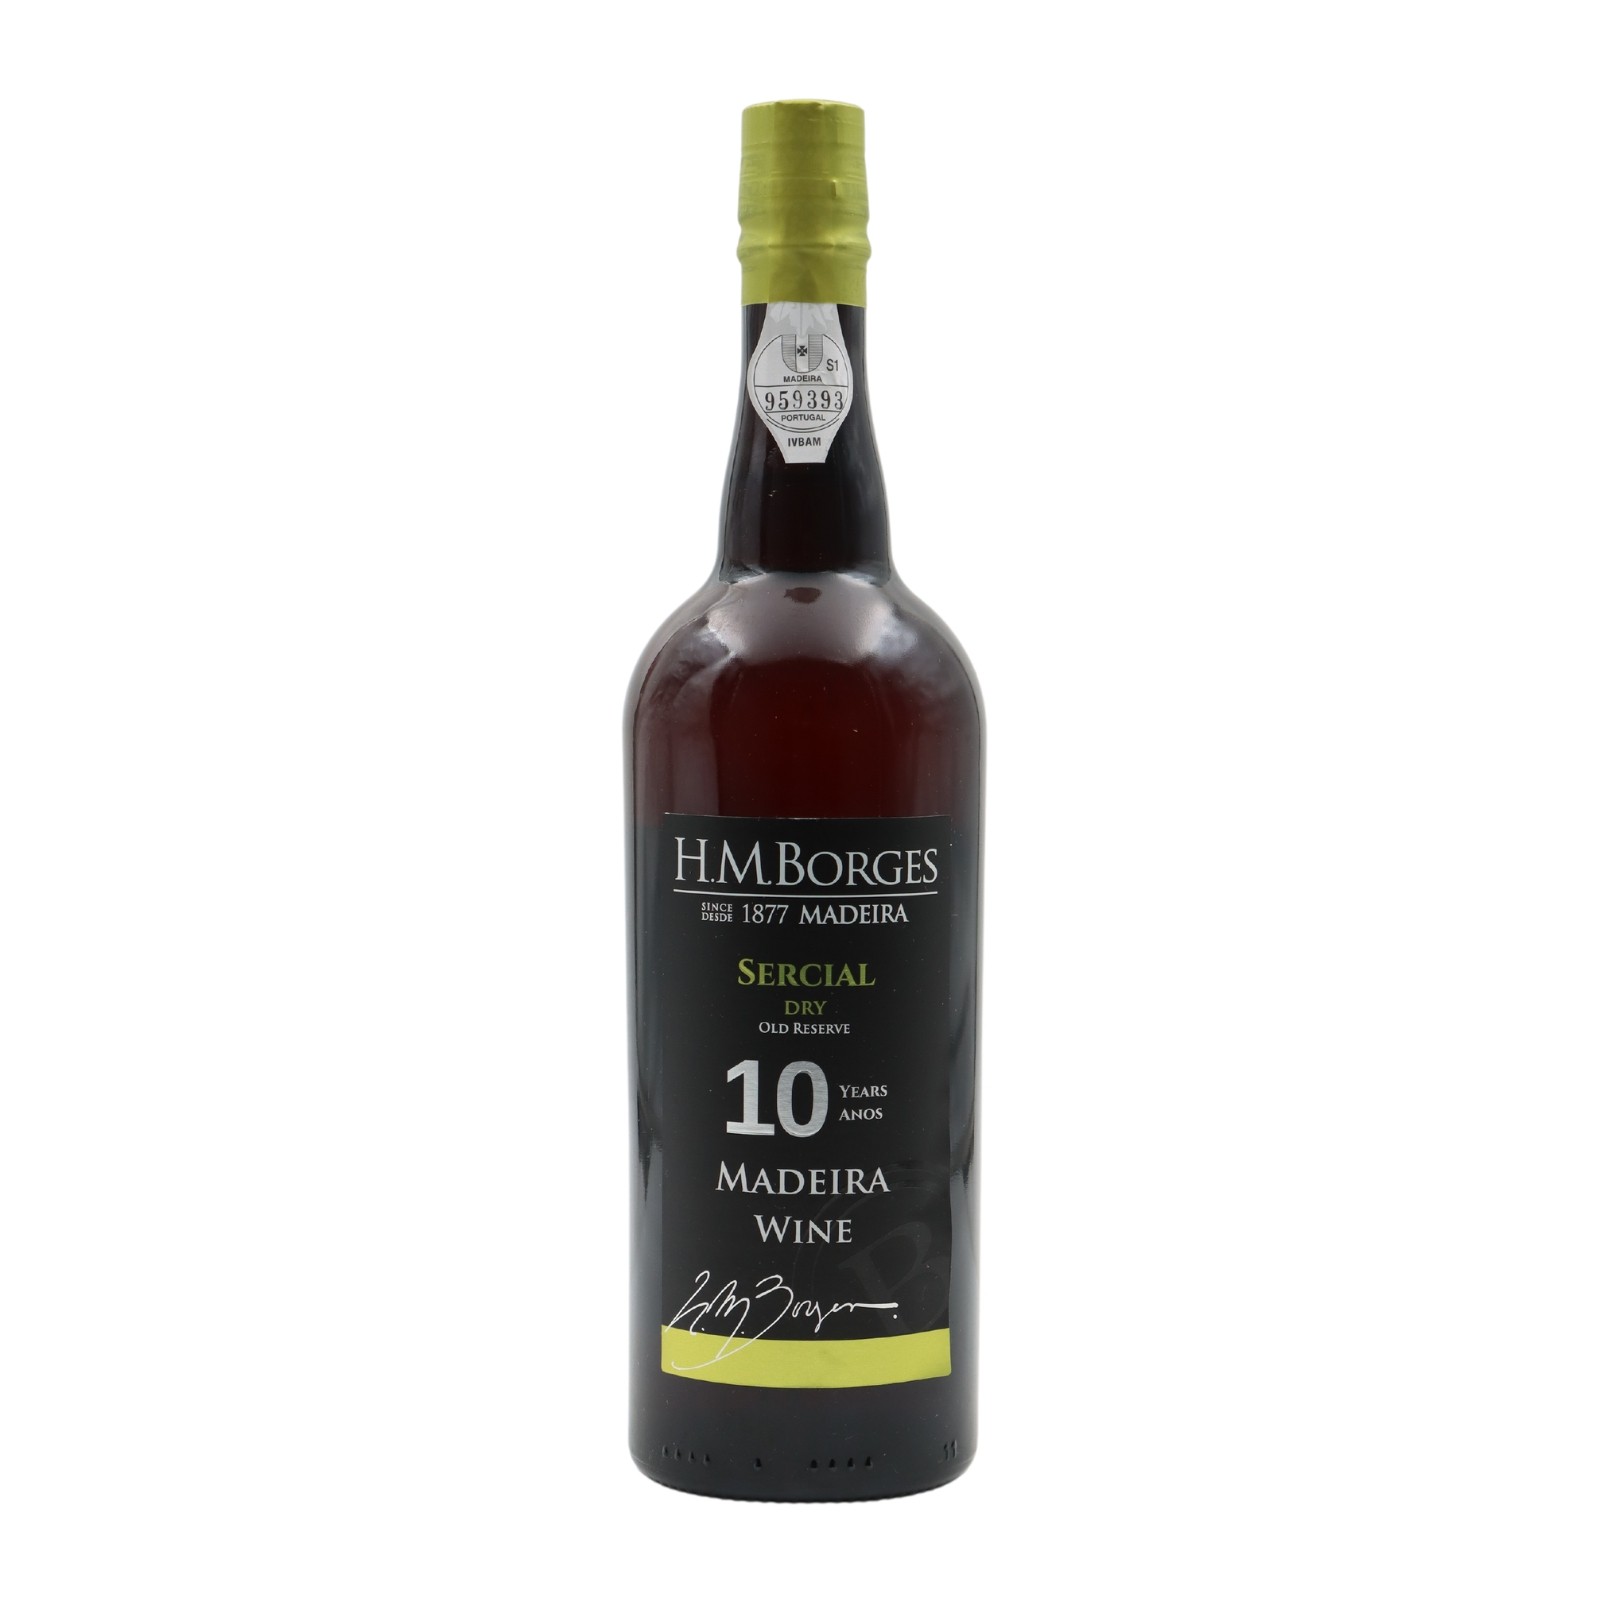 H M Borges Sercial 10 years Madeira